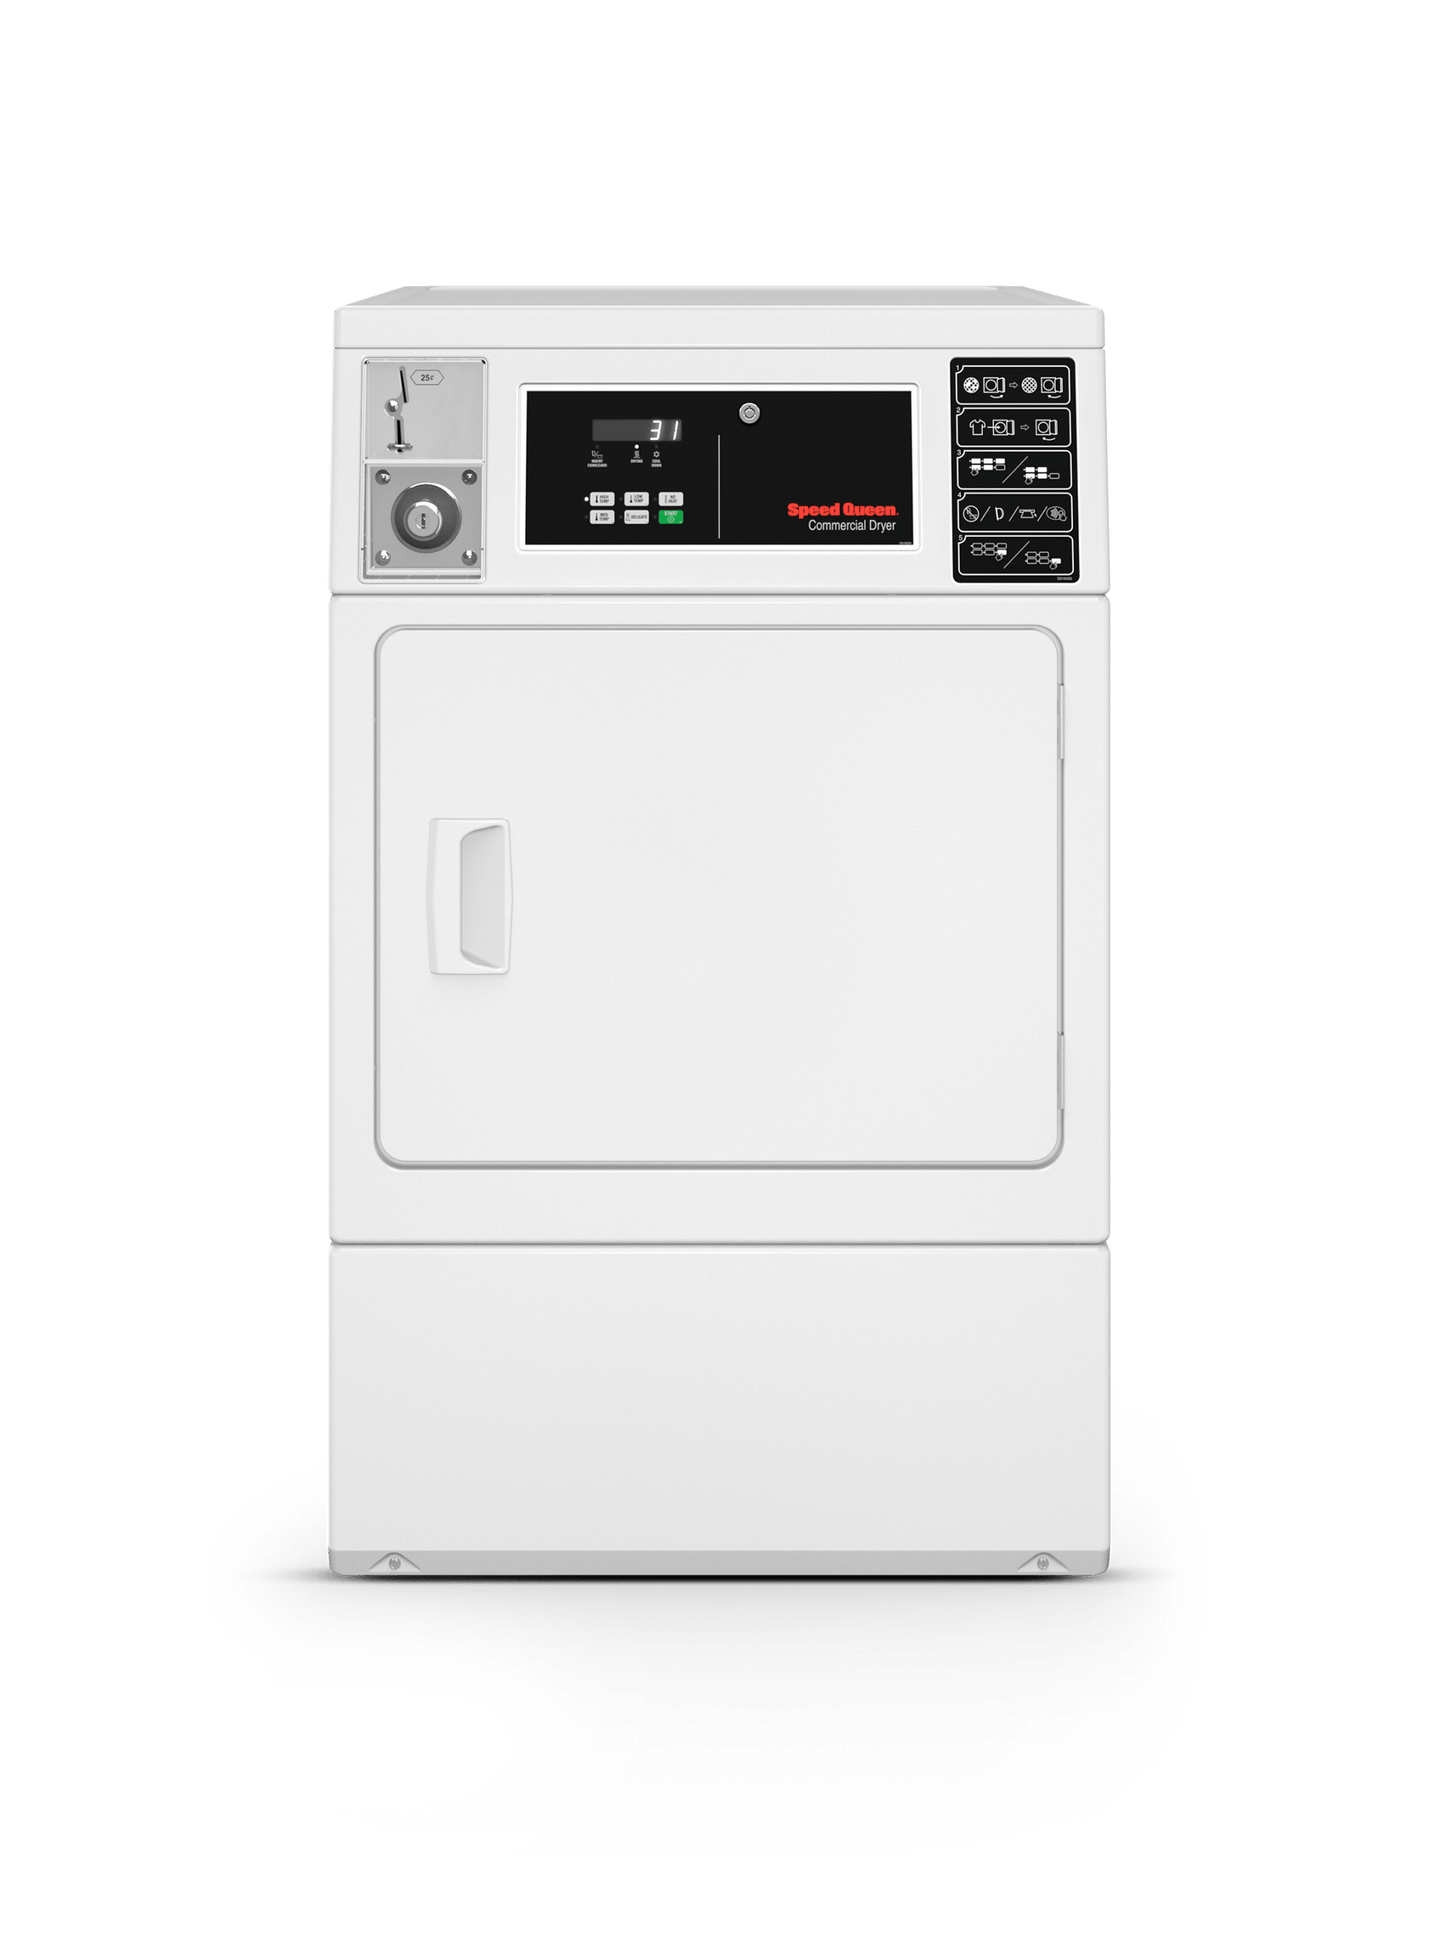 Speed Queen DV6010WE Light Commercial Coin Drop Front Control Front Load Matching Dryer - Electric